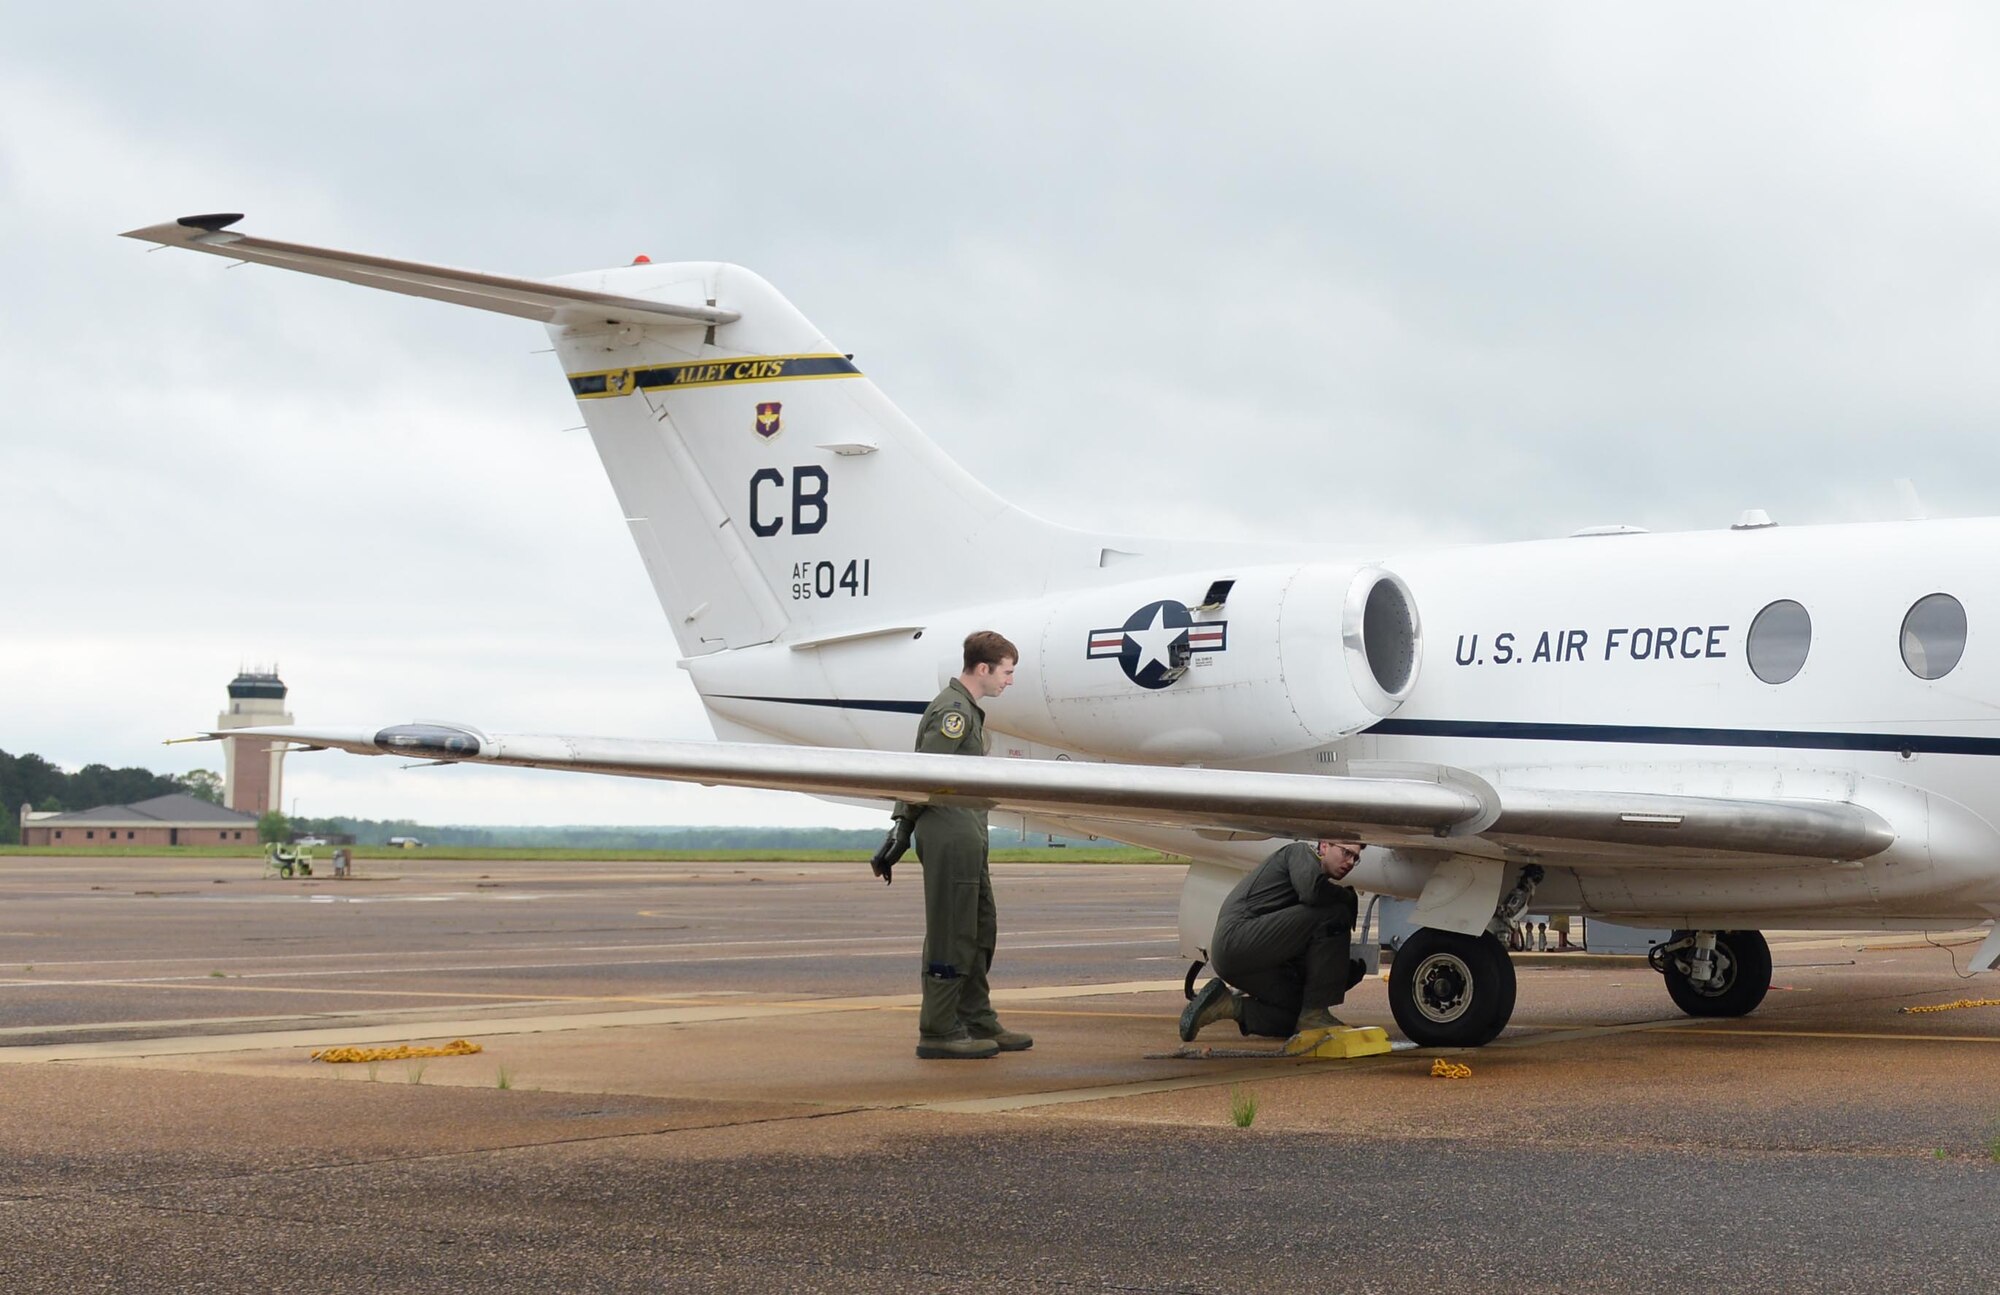 Two 14th Flying Training Wing pilots conduct preflight checks on a T-1A Jayhawk April 9, 2020, at Columbus Air Force Base, Miss. The T-1 is a medium-range, twin-engine jet trainer used in the advanced phase of specialized undergraduate pilot training for students selected to fly airlift or tanker aircraft. Pilot training has been deemed essential operations and continues amid the COVID-19 pandemic. (U.S. Air Force photo by Airman 1st Class Davis Donaldson)